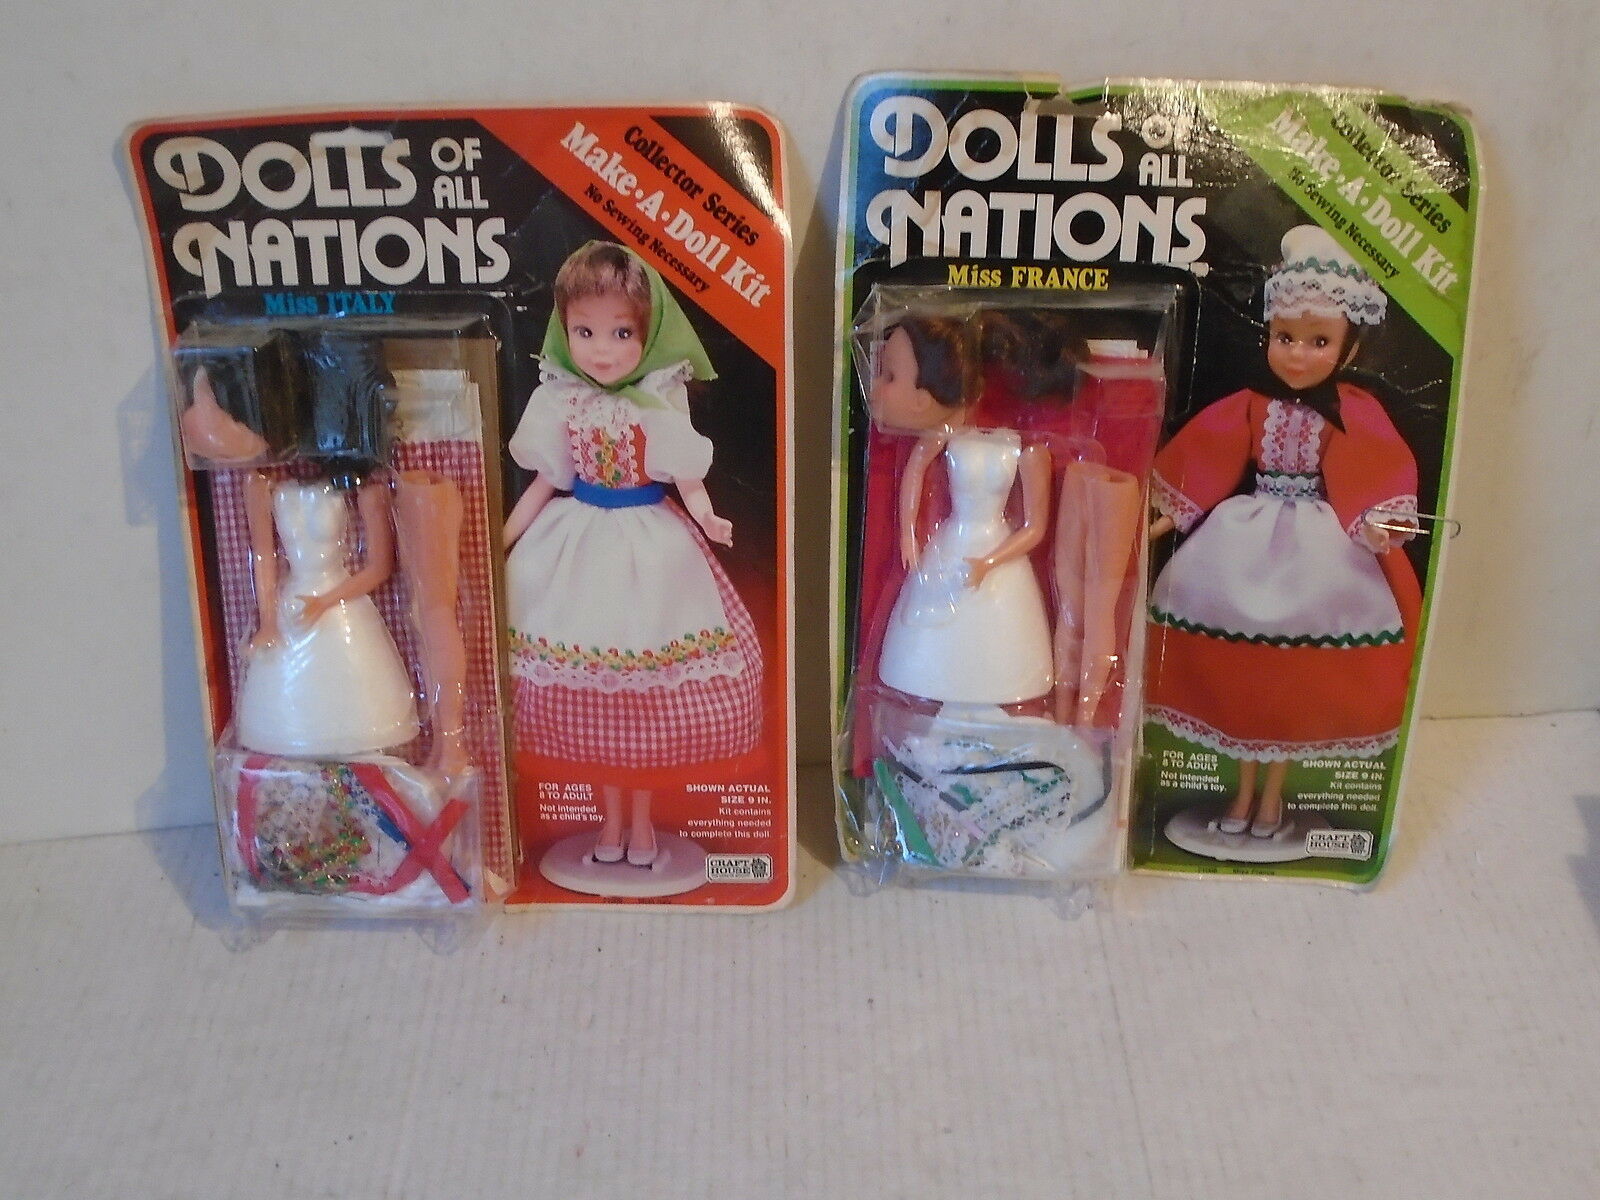 2 Craft House Dolls Of All Nations Kit Collectors' Series 9" Miss Italy & France